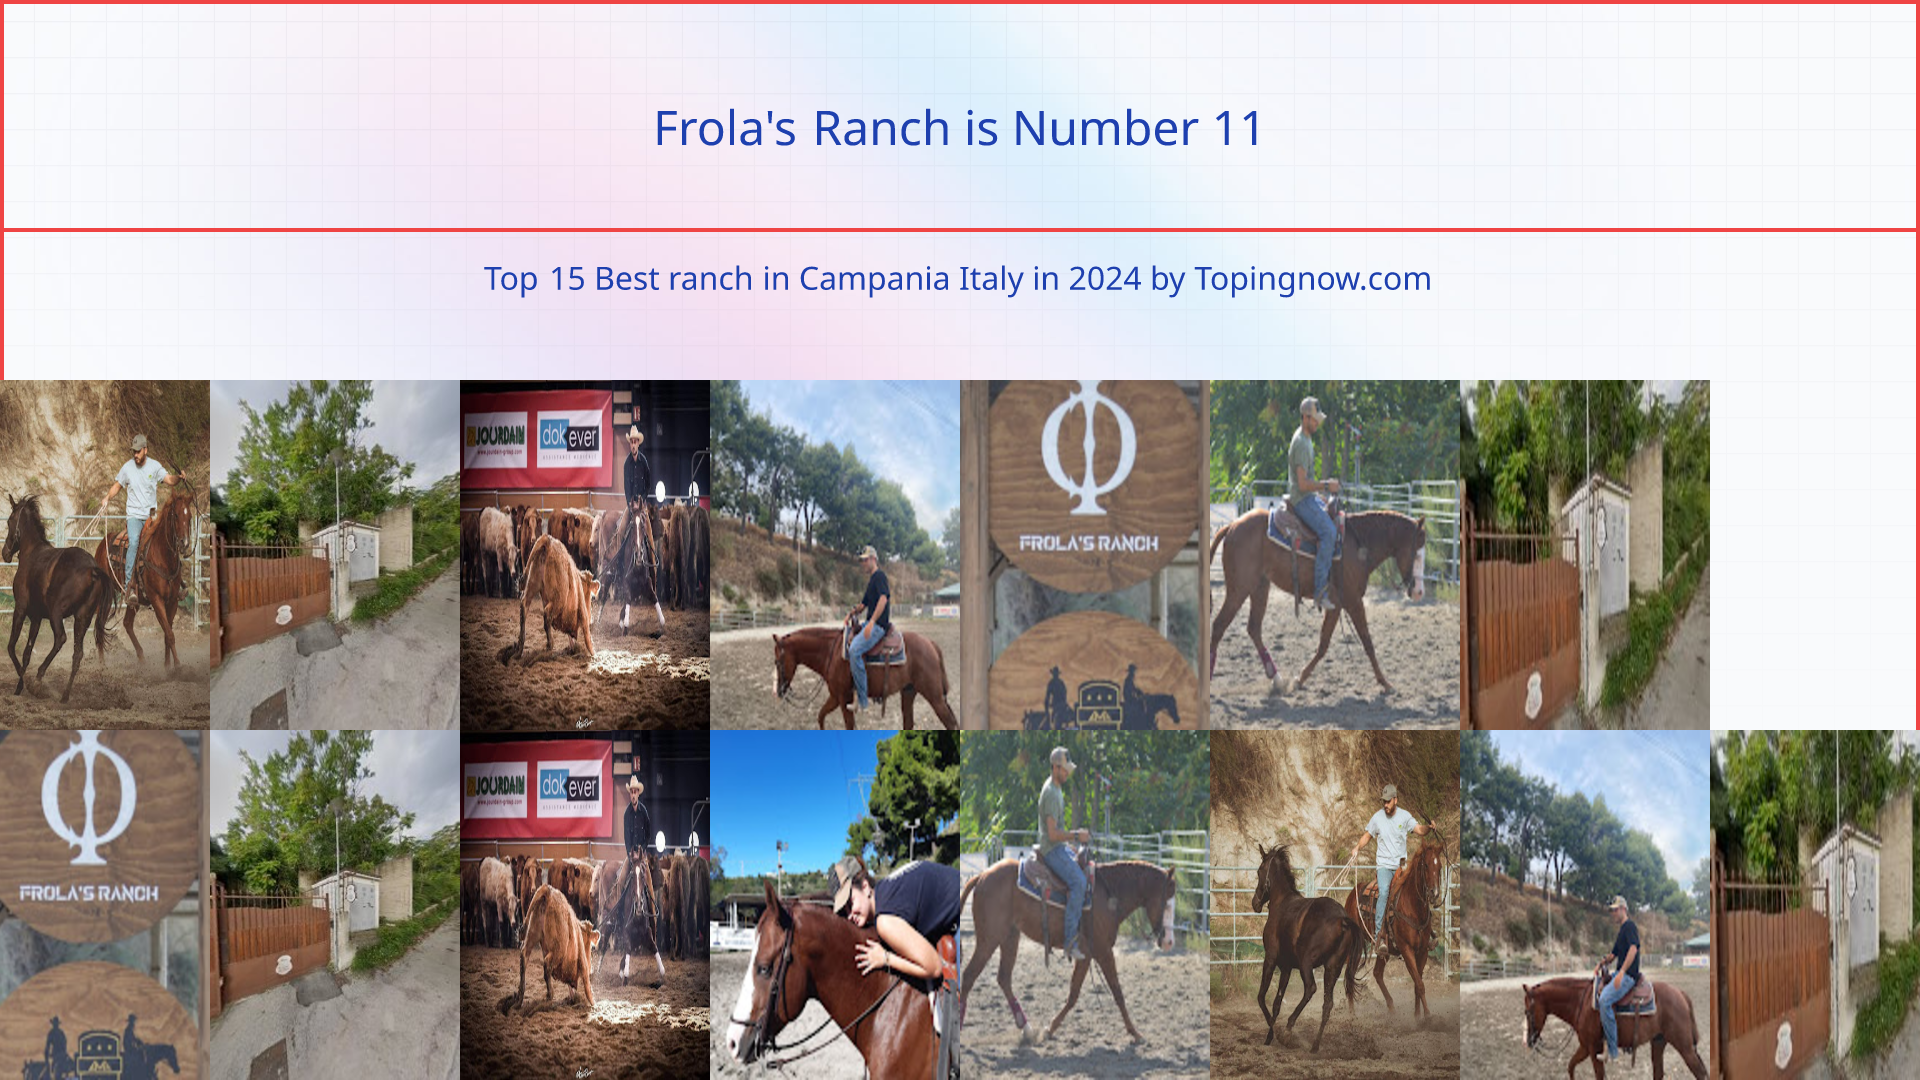 Frola's Ranch: Top 15 Best ranch in Campania Italy in 2024